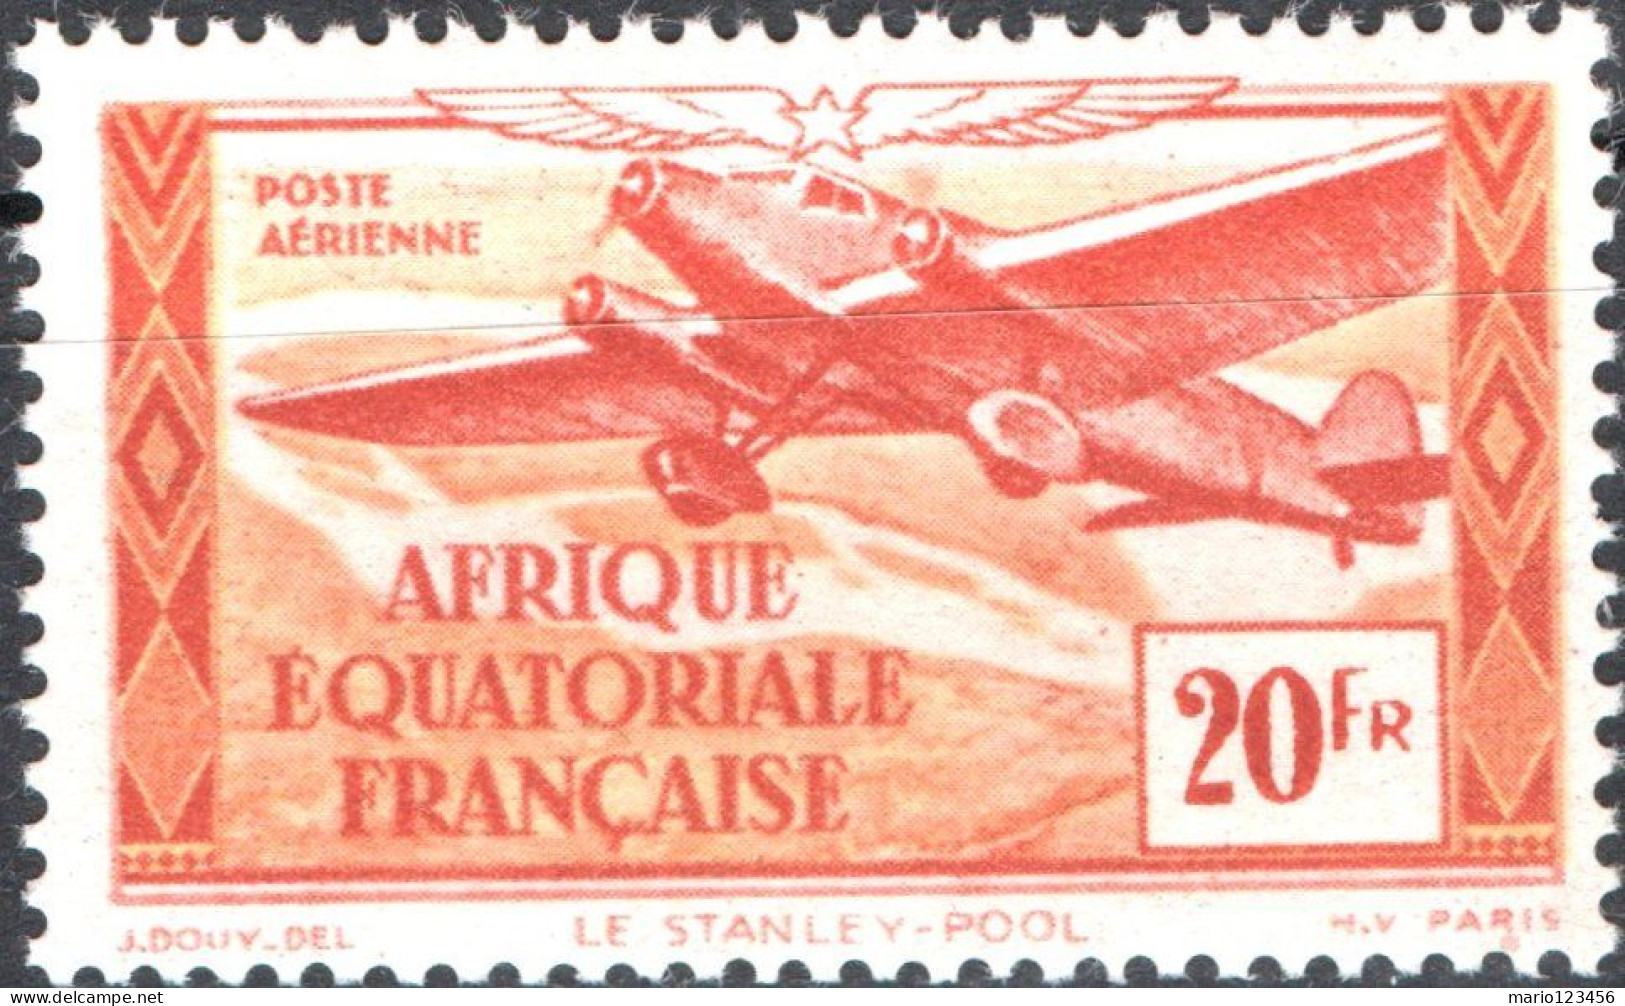 AFRICA EQUATORIALE FRANCESE, AIRMAIL, 20 Fr., 1944, NUOVO (MNH**) Mi:FR-EQ 208, Scott:FR-EQ C23K, Yt:FR-EQ PA40 - Unused Stamps